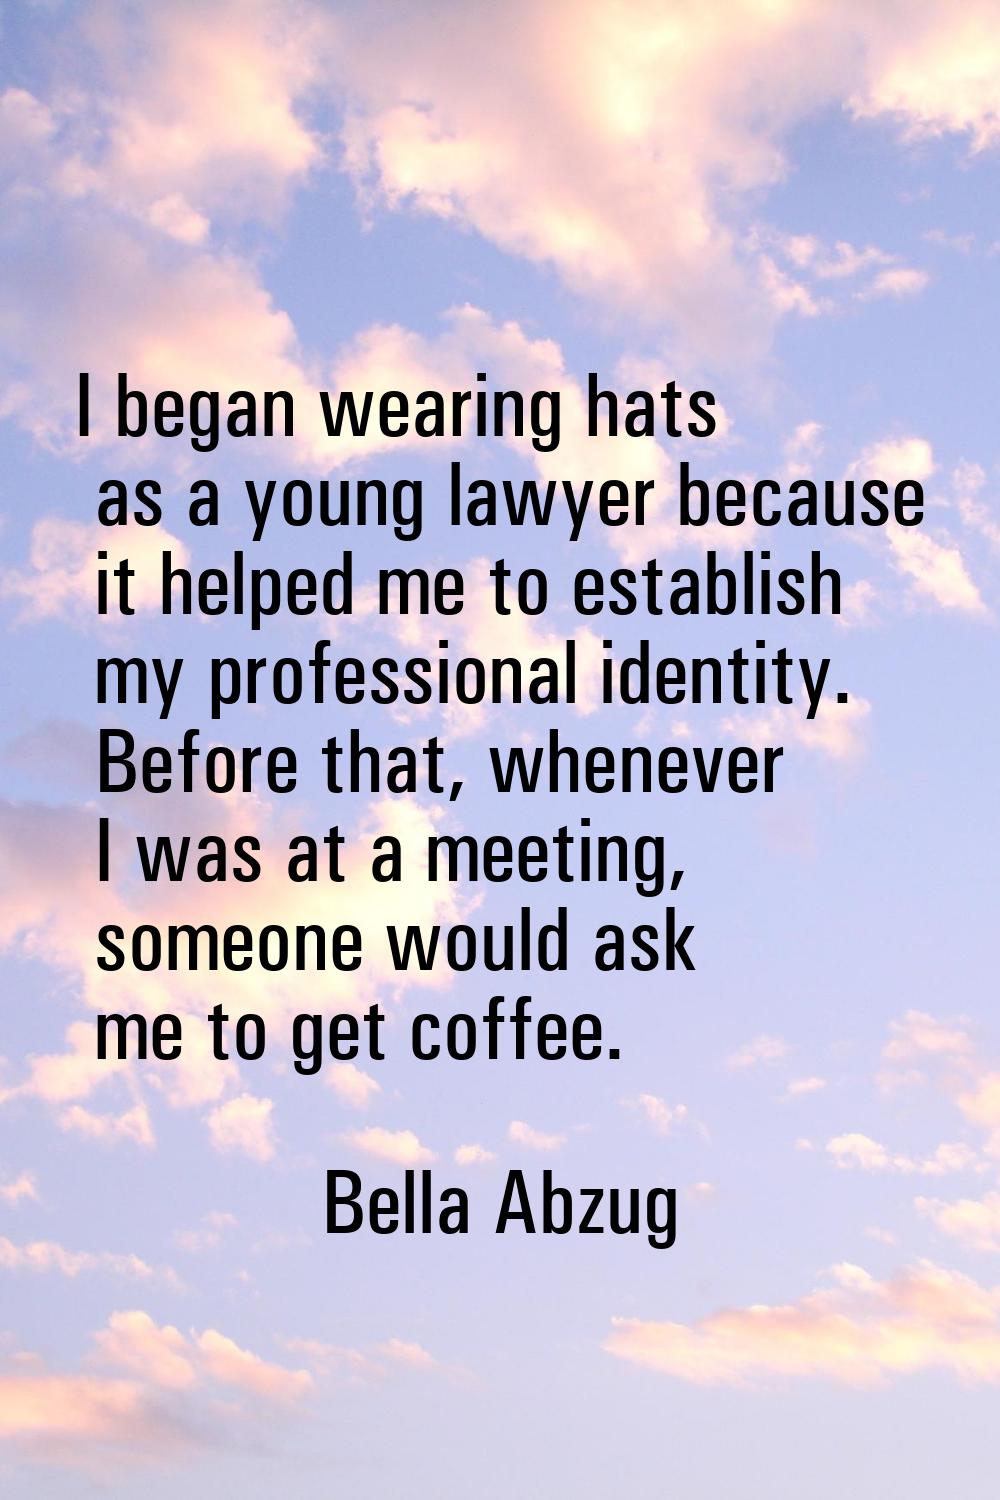 I began wearing hats as a young lawyer because it helped me to establish my professional identity. 